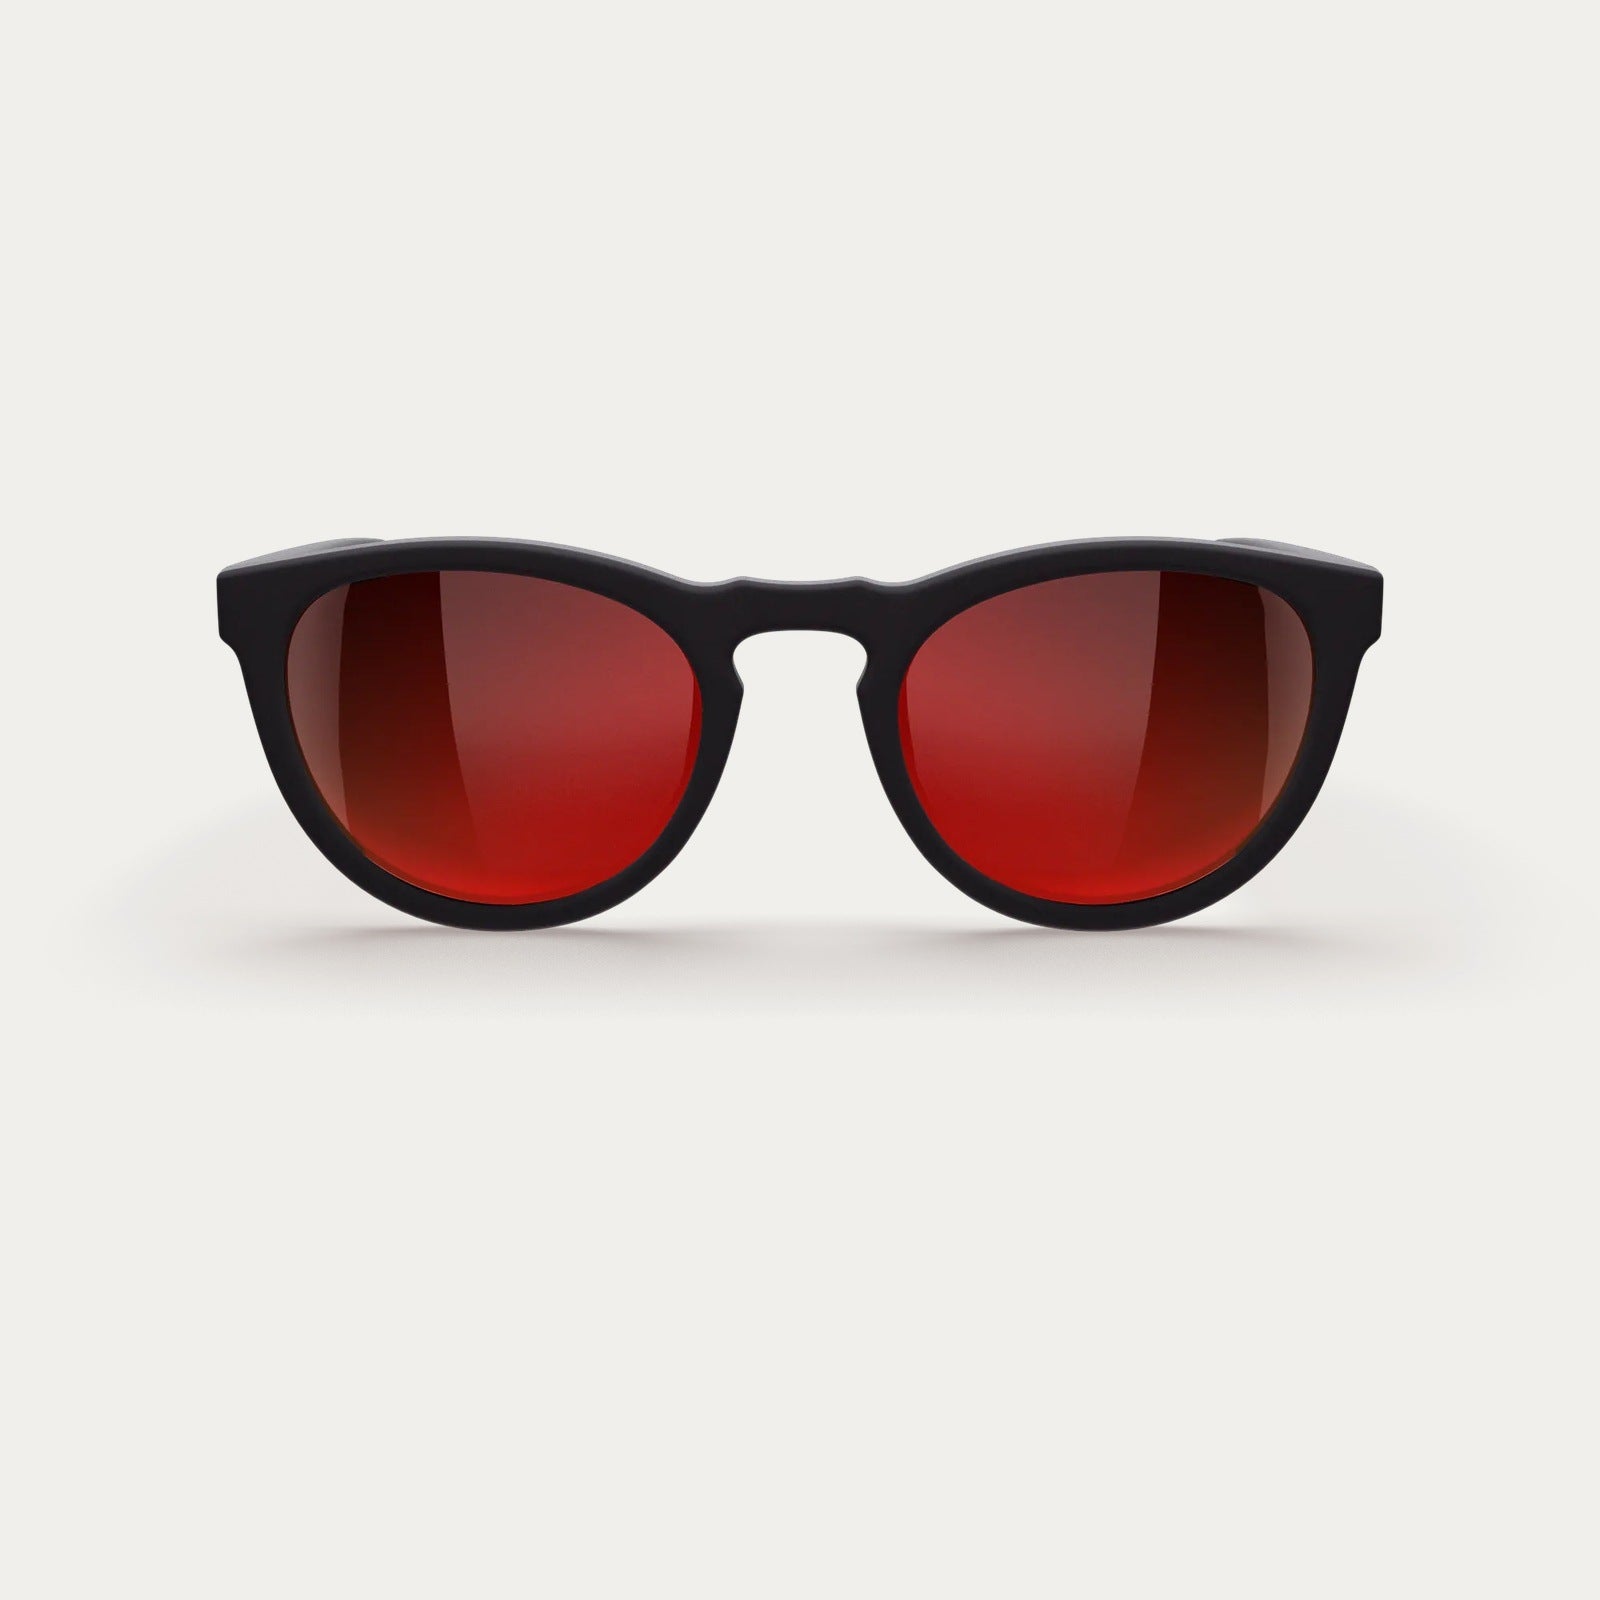 Unbreakable Sunglasses by REKS, Black SPORT with Blac-Red Mirror  Polycarbonate Lenses 